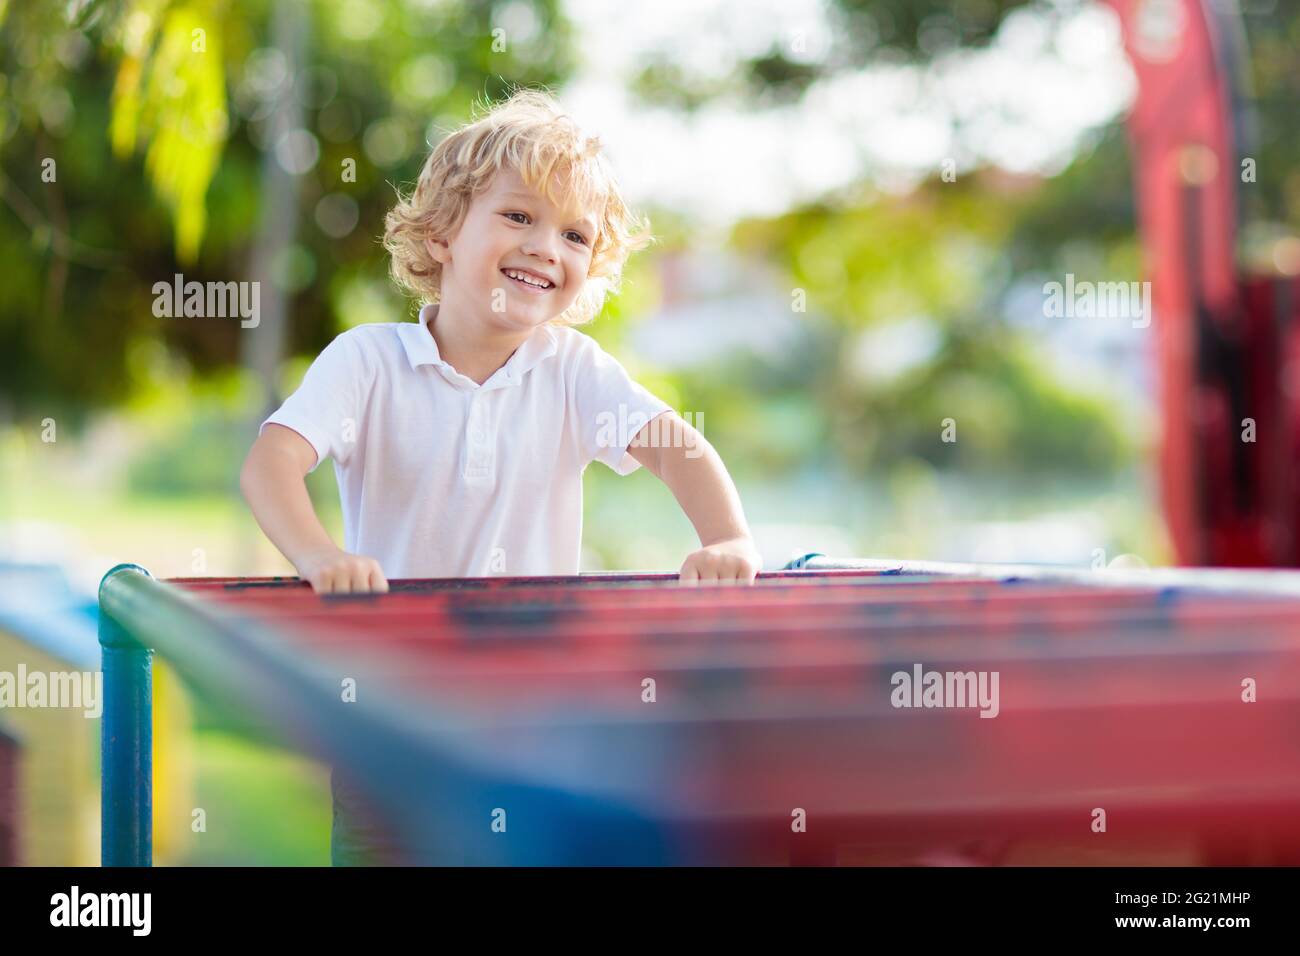 Child playing on outdoor playground in rain. Kids play on school or kindergarten yard. Active kid on colorful monkey bars. Healthy summer activity Stock Photo